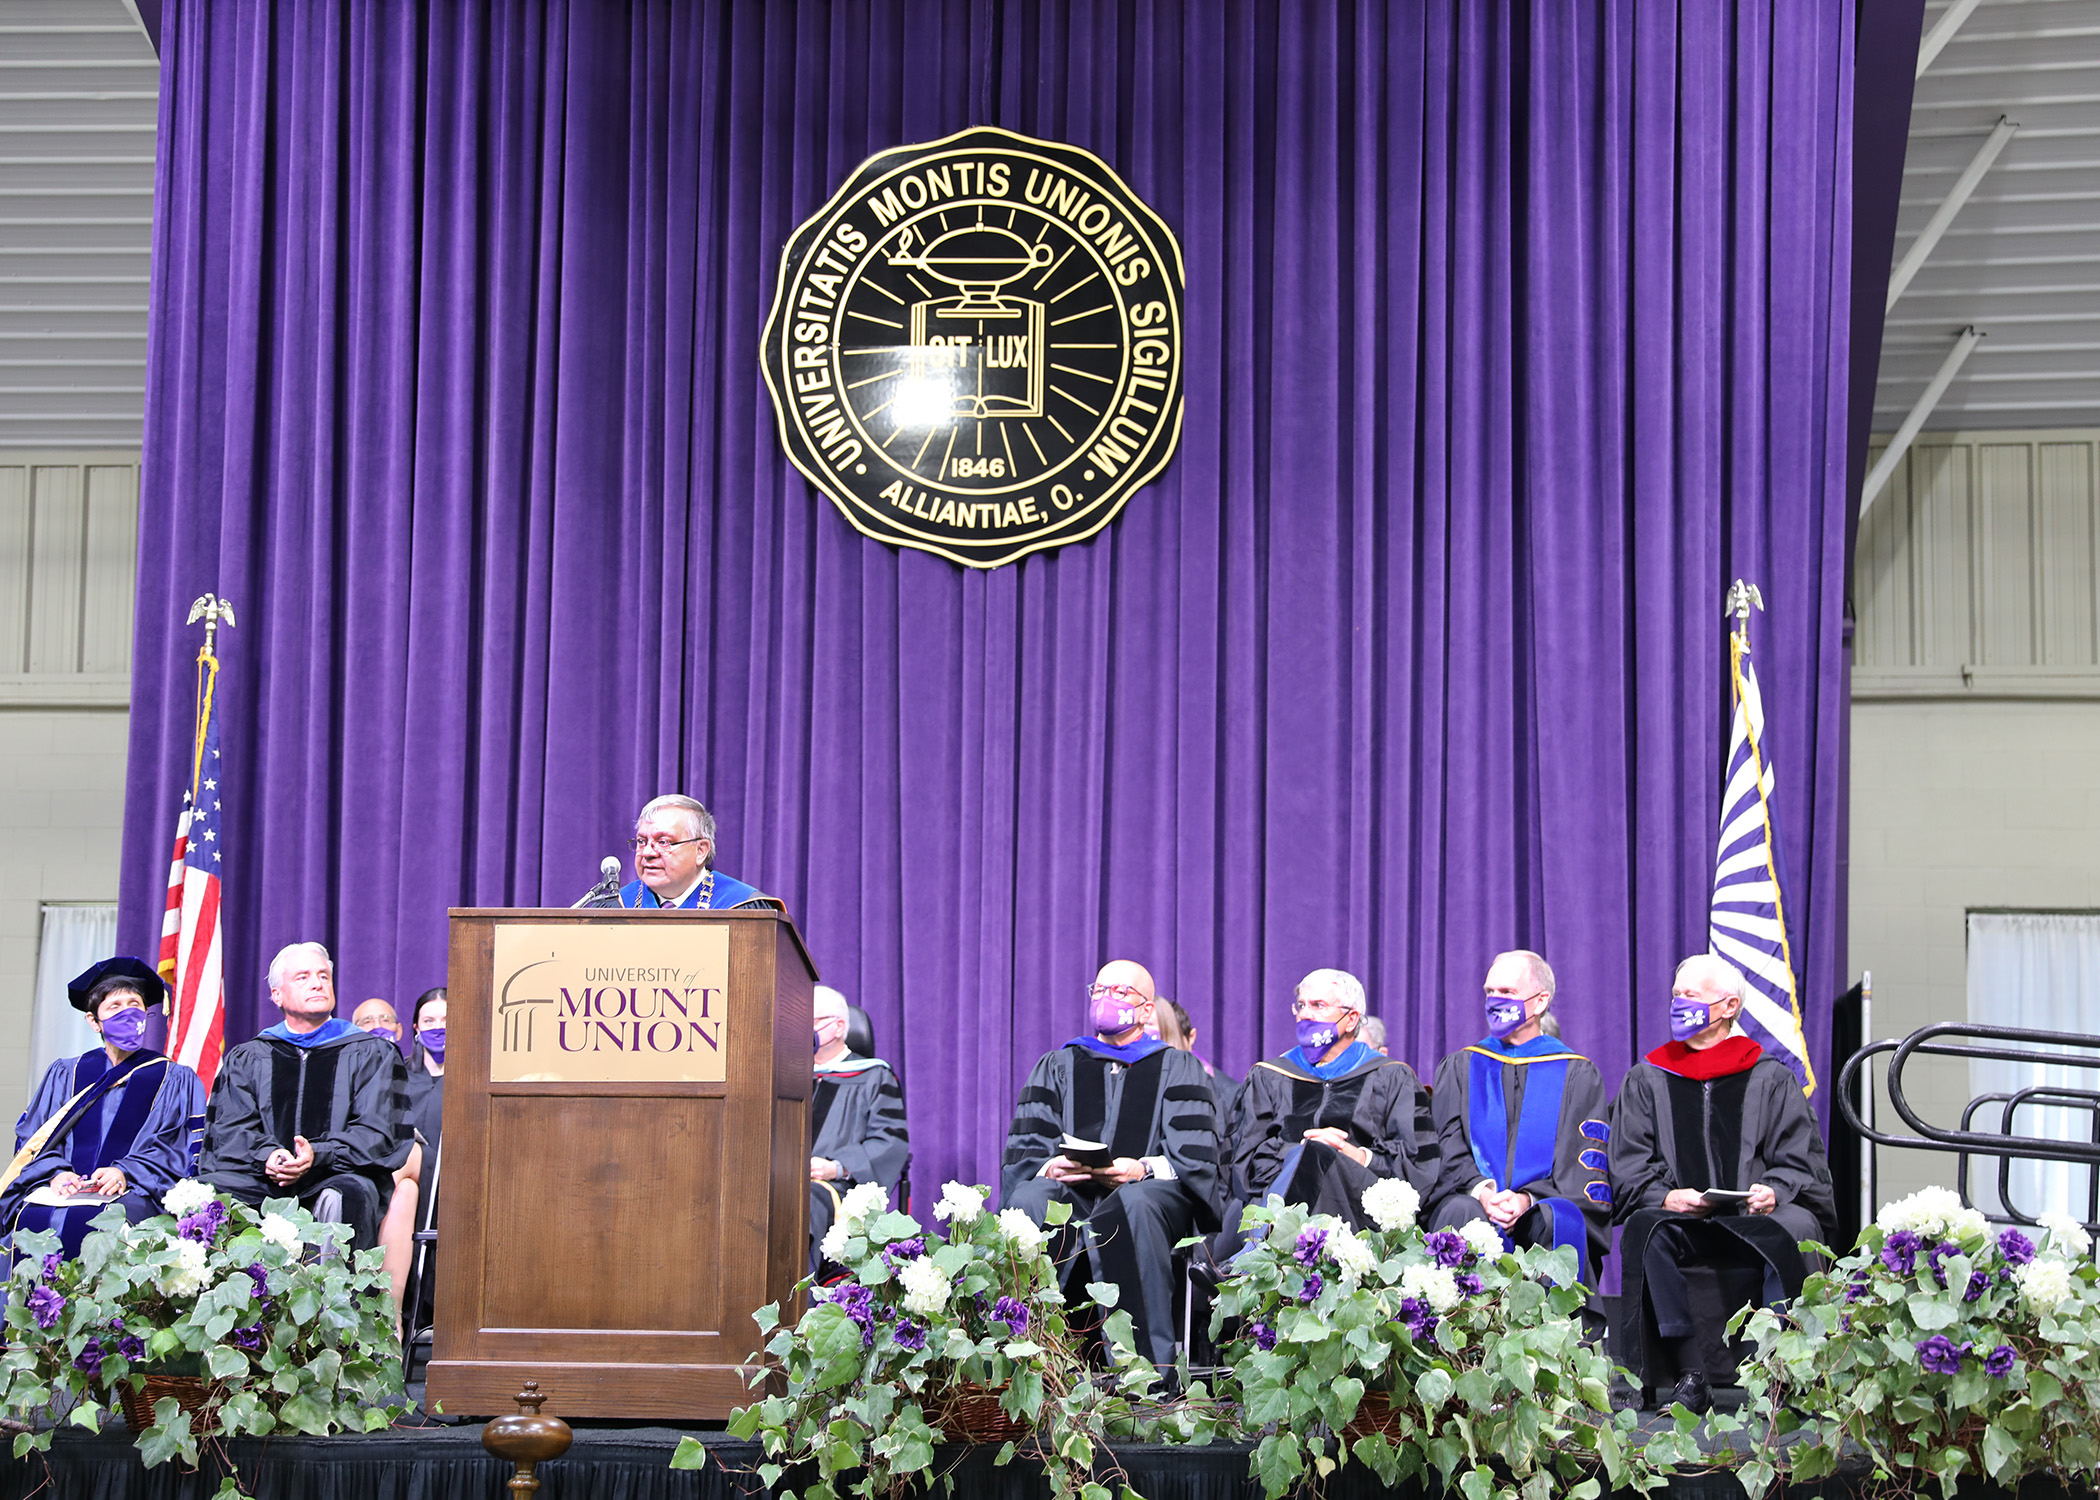 Dr. Tom Botzman Installed as 13th President of Mount Union